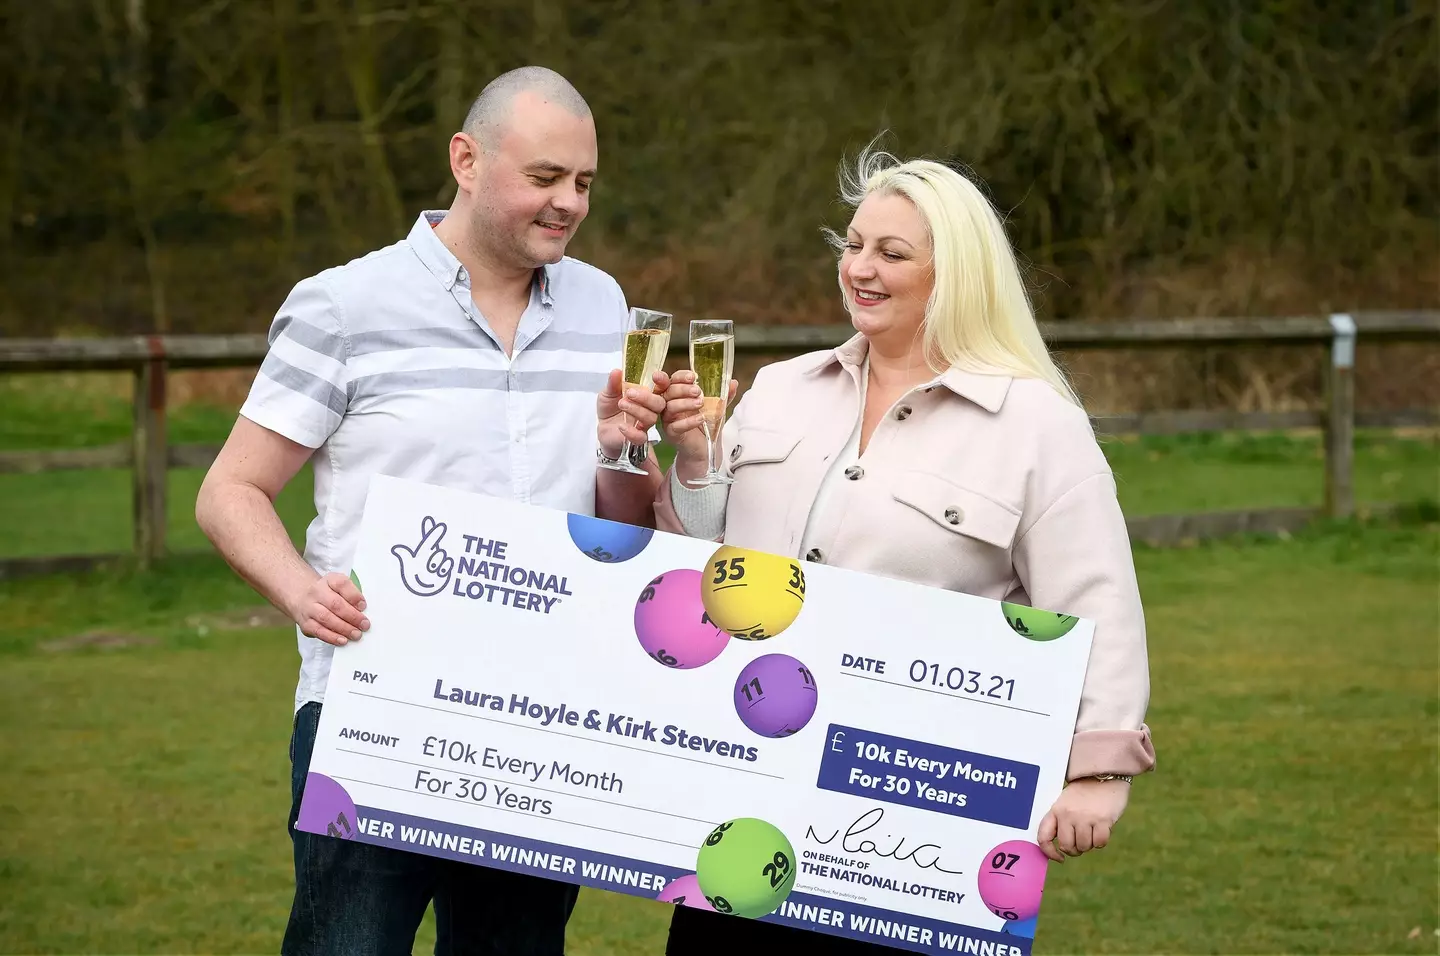 Kirk Stevens and Laura Hoyle had much to celebrate after winning the National Lottery.